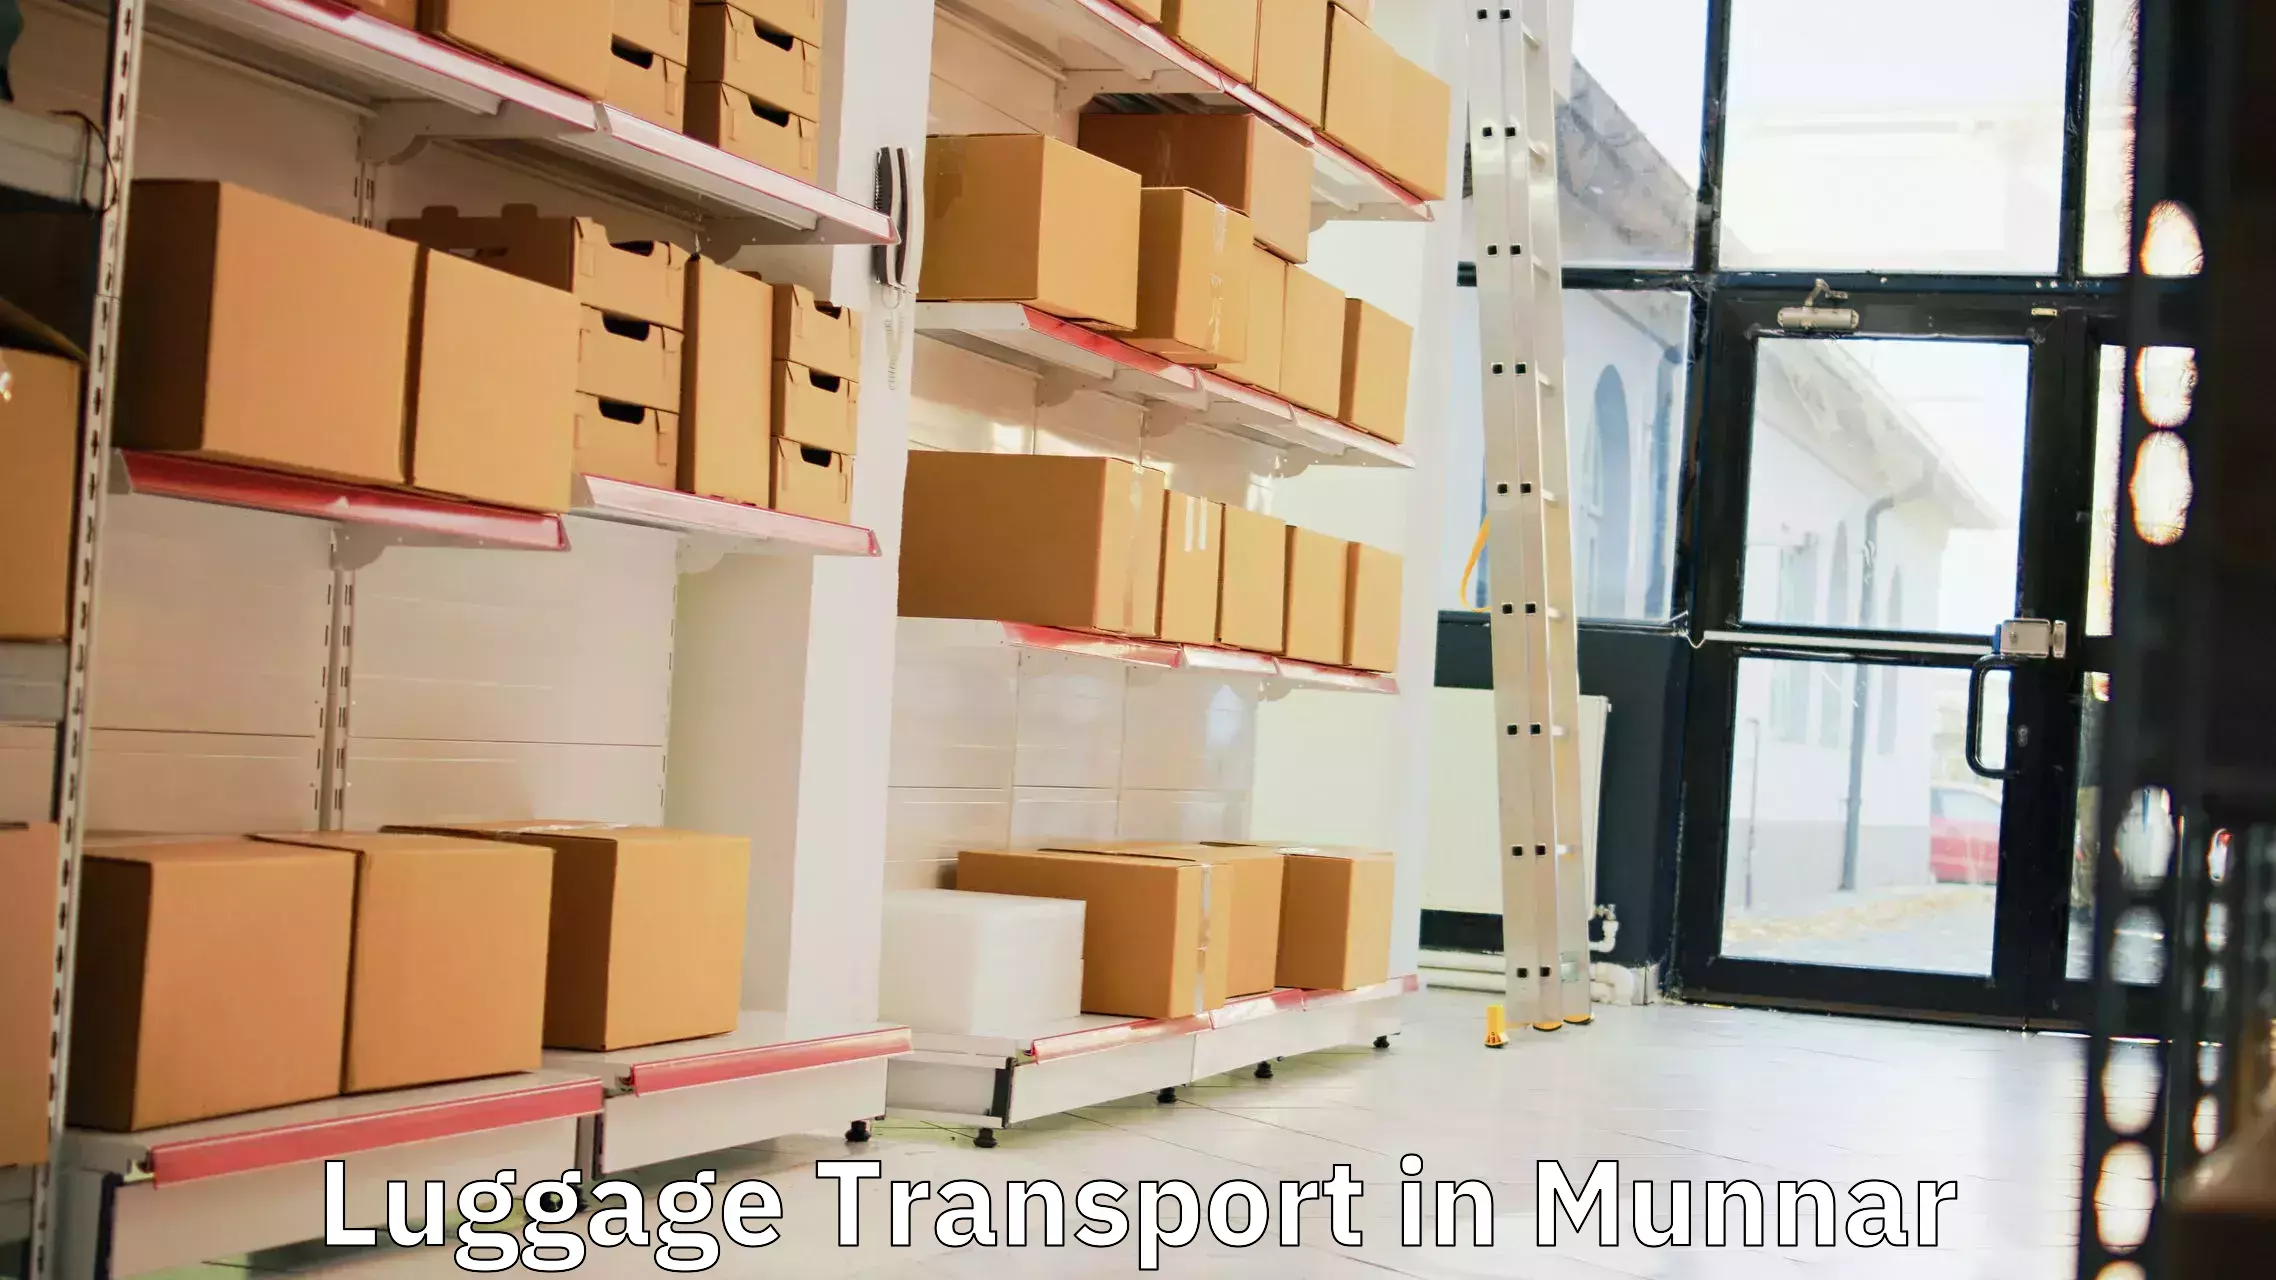 Baggage relocation service in Munnar